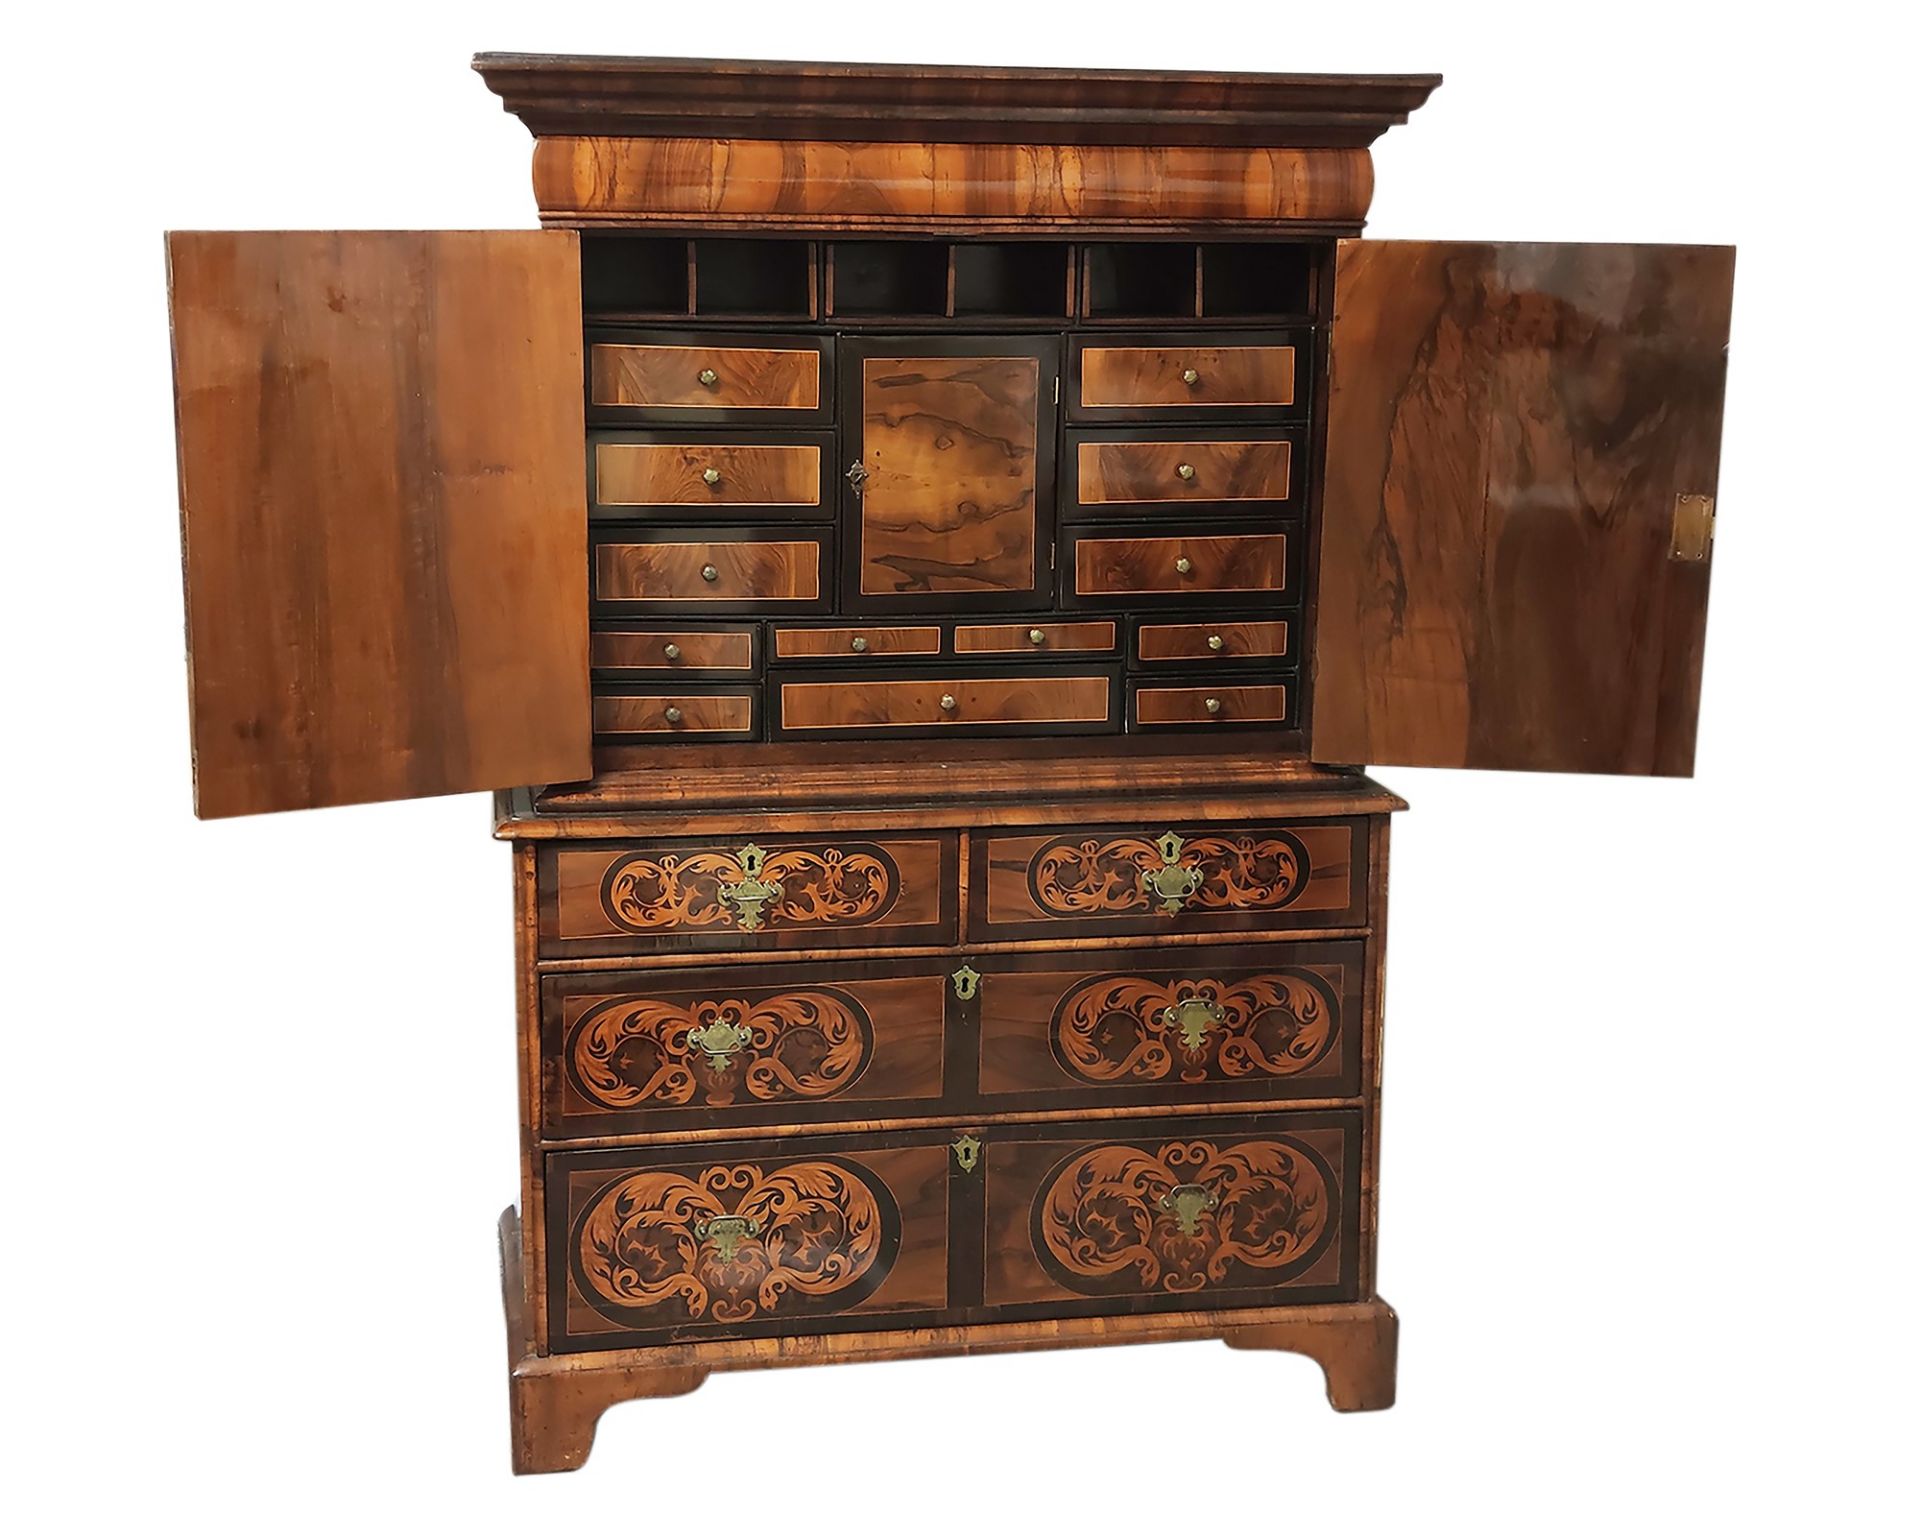 Inlaid two-parts secretaire, 18th-19th centuries - Image 4 of 5